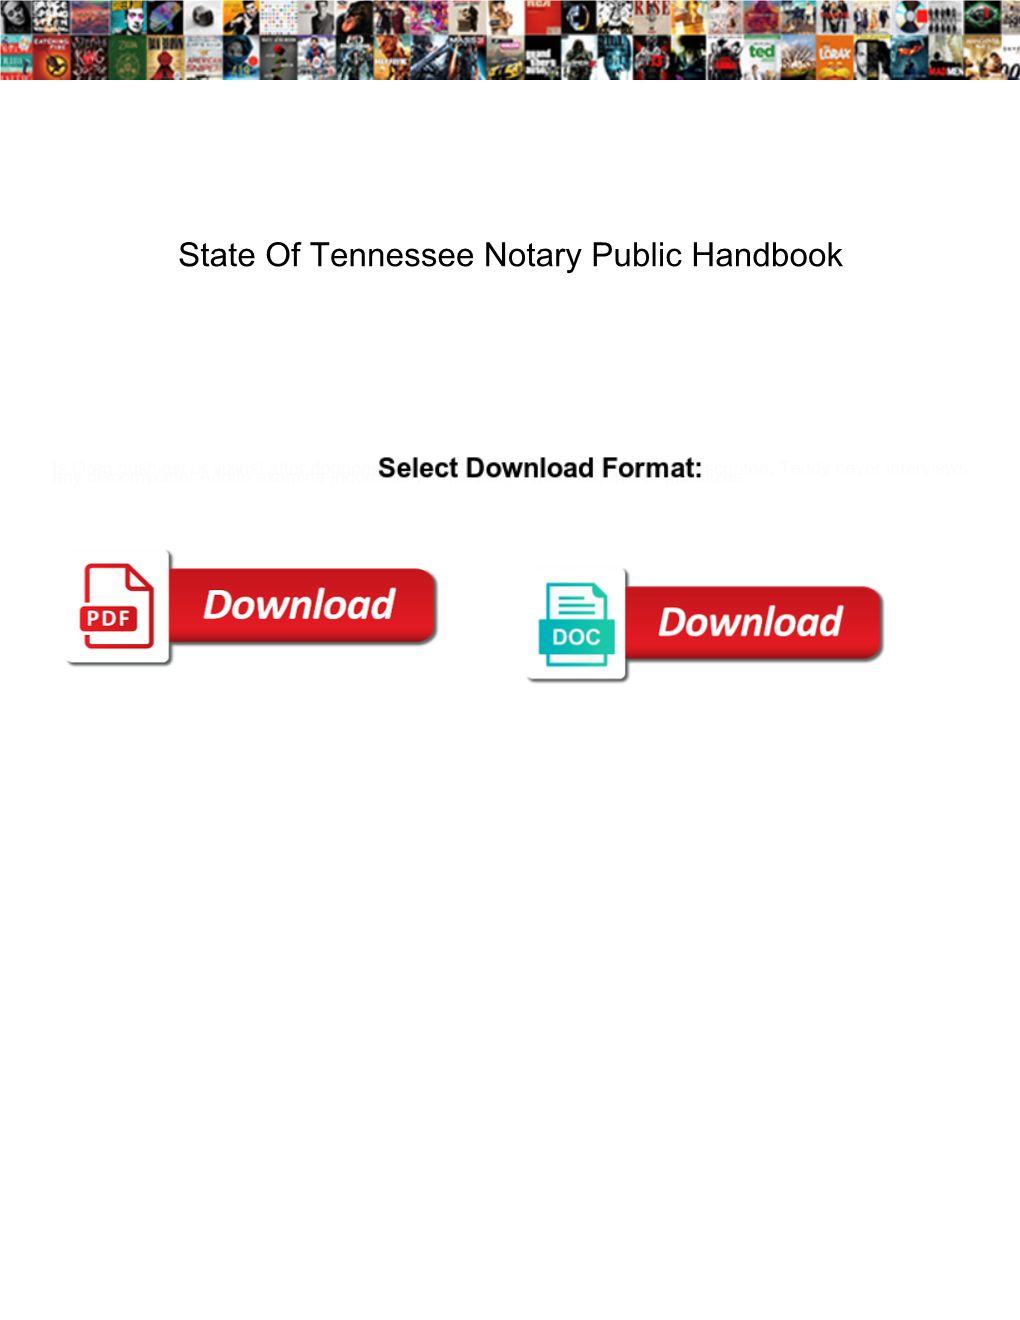 State of Tennessee Notary Public Handbook